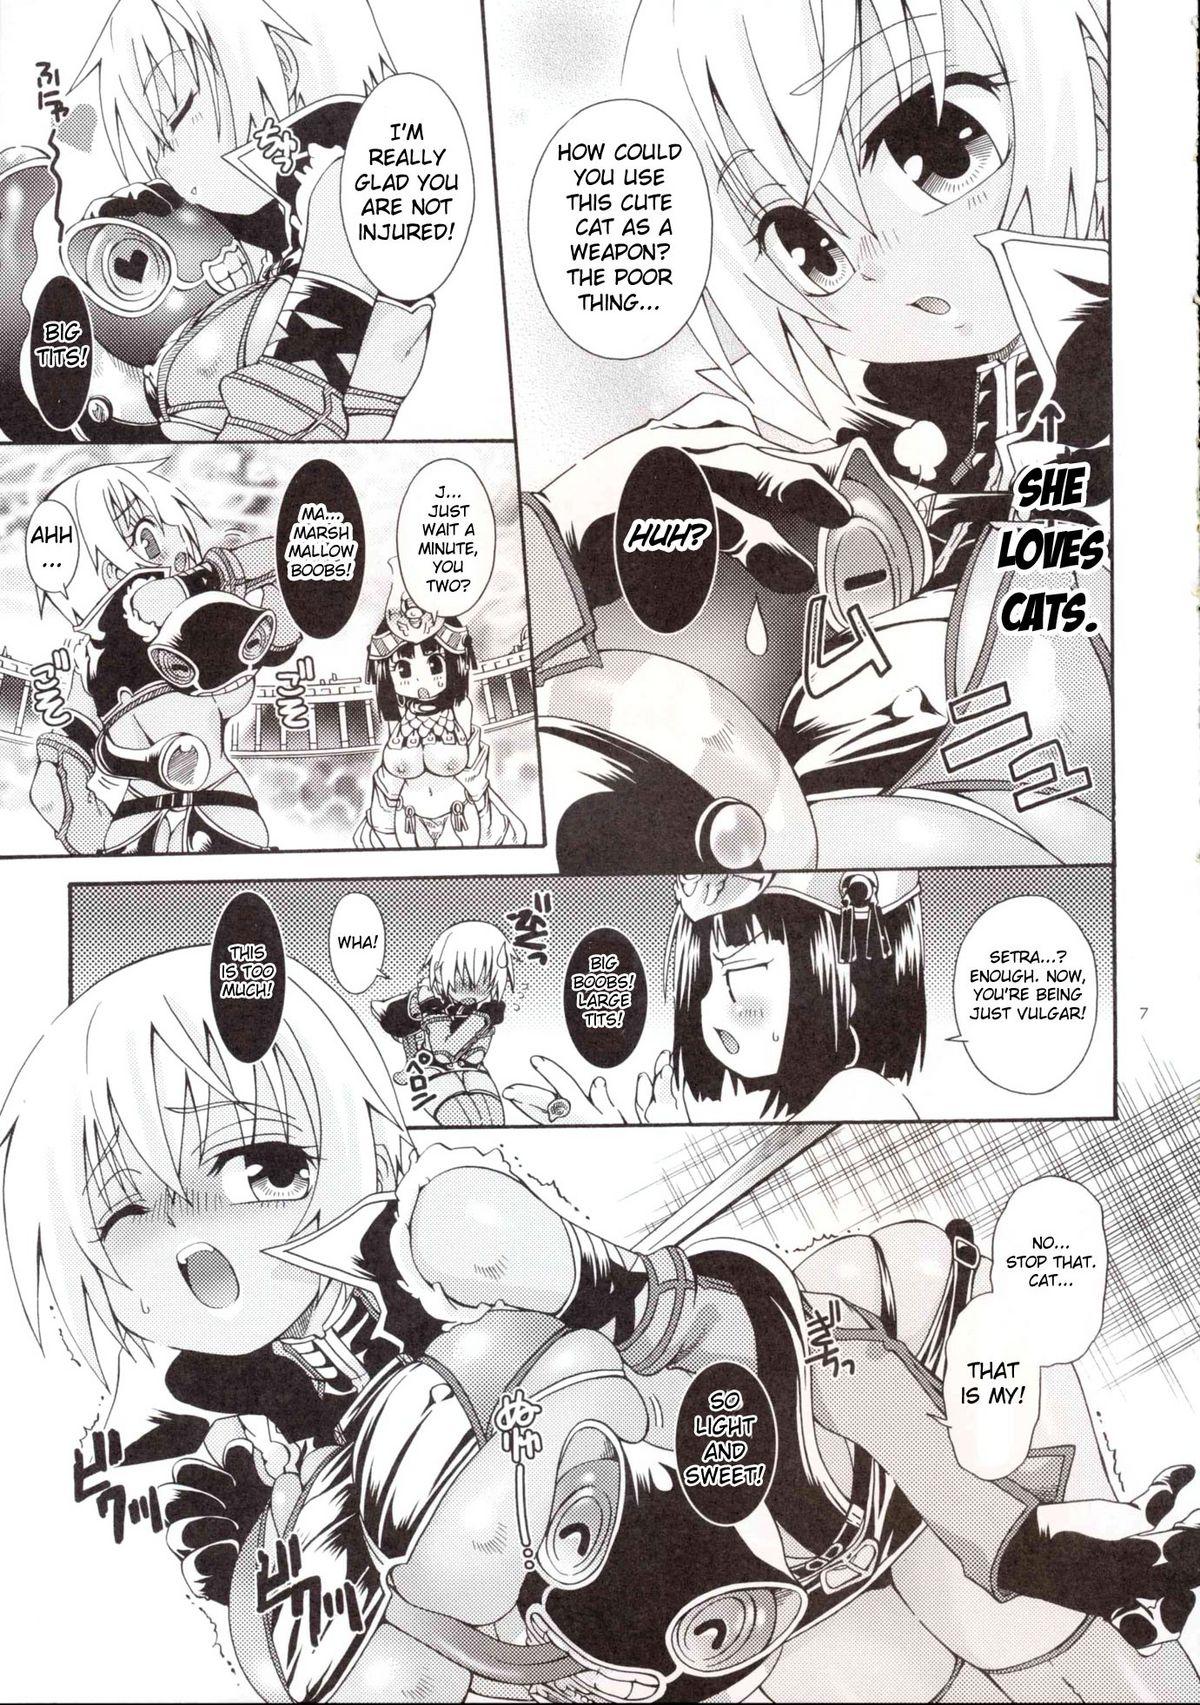 Bbc Cat Fight Over Drive - Queens blade Money Talks - Page 6